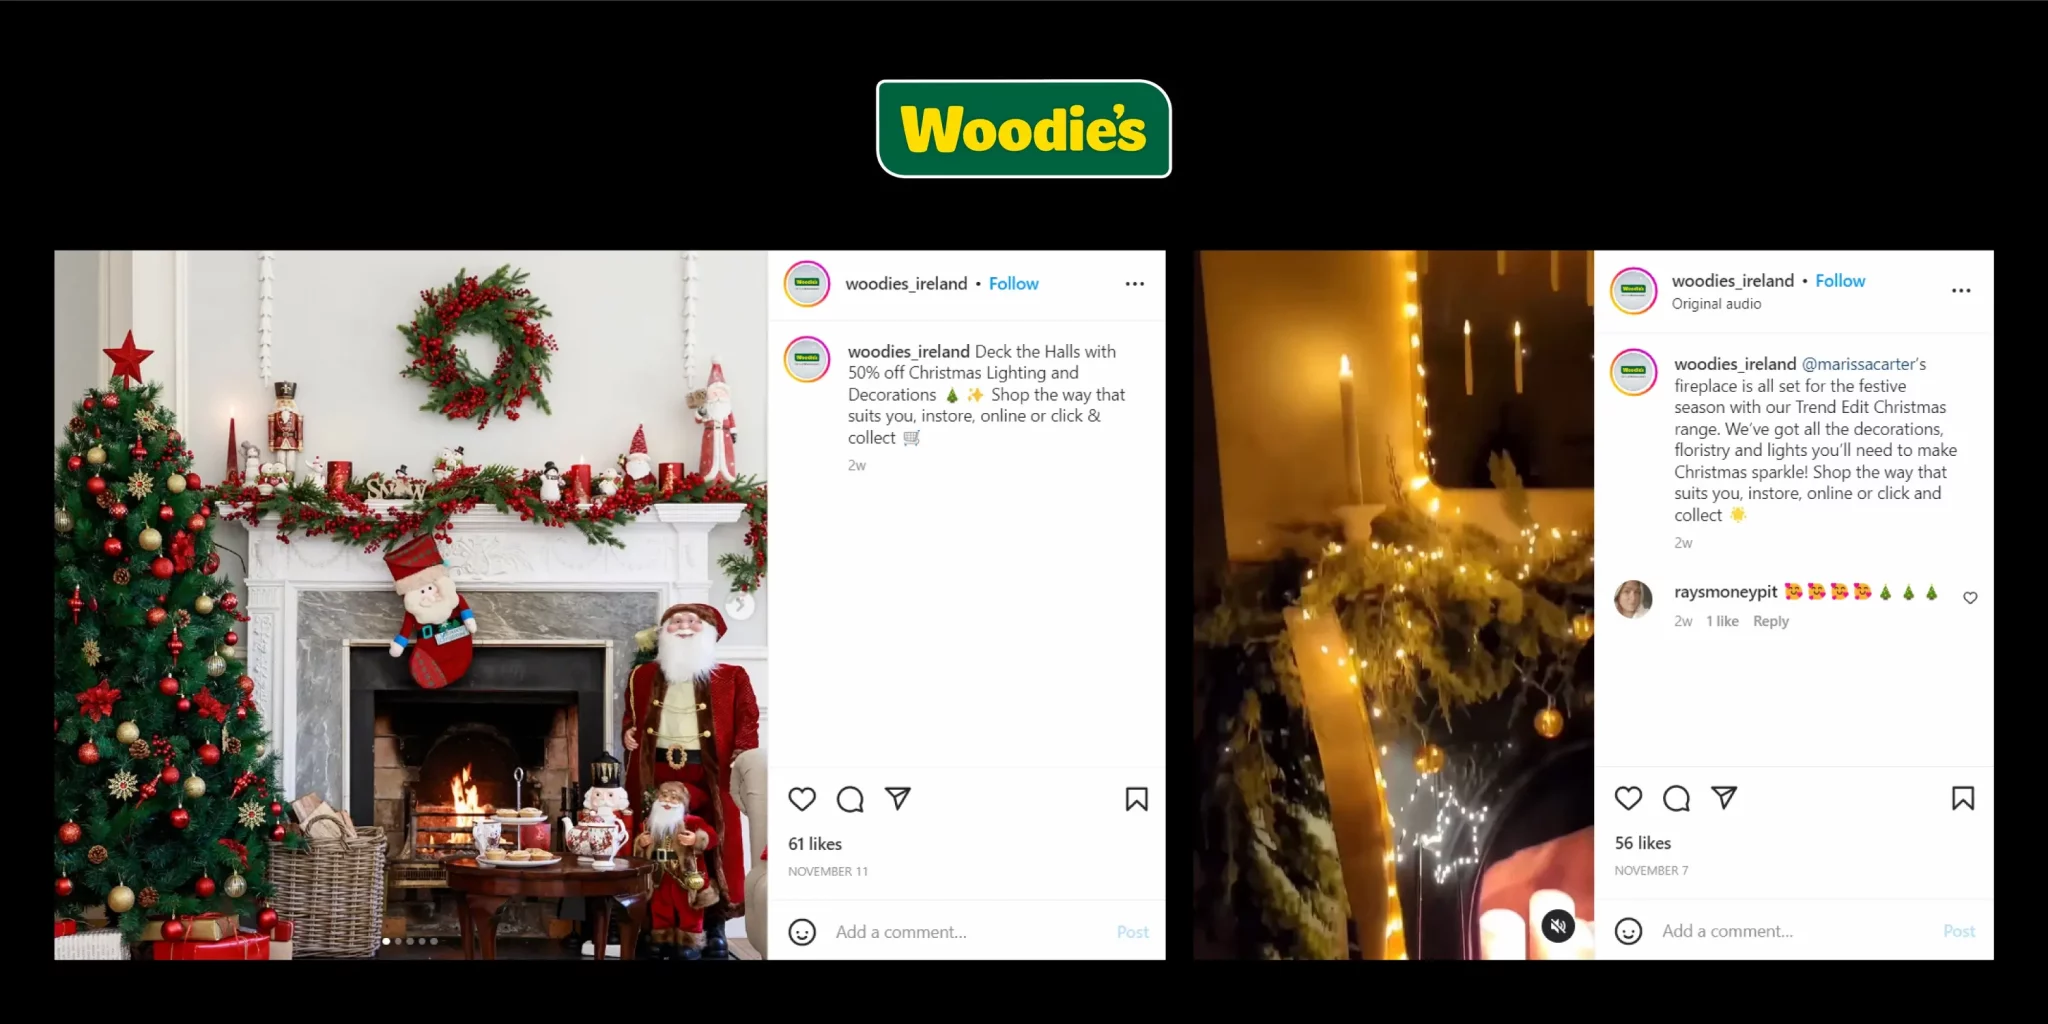 Christmas tree with ornaments fireplace with green and red wreaths and floristry mantel with Santa Claus figurines baskets gifts Instagram reels Christmas lights 